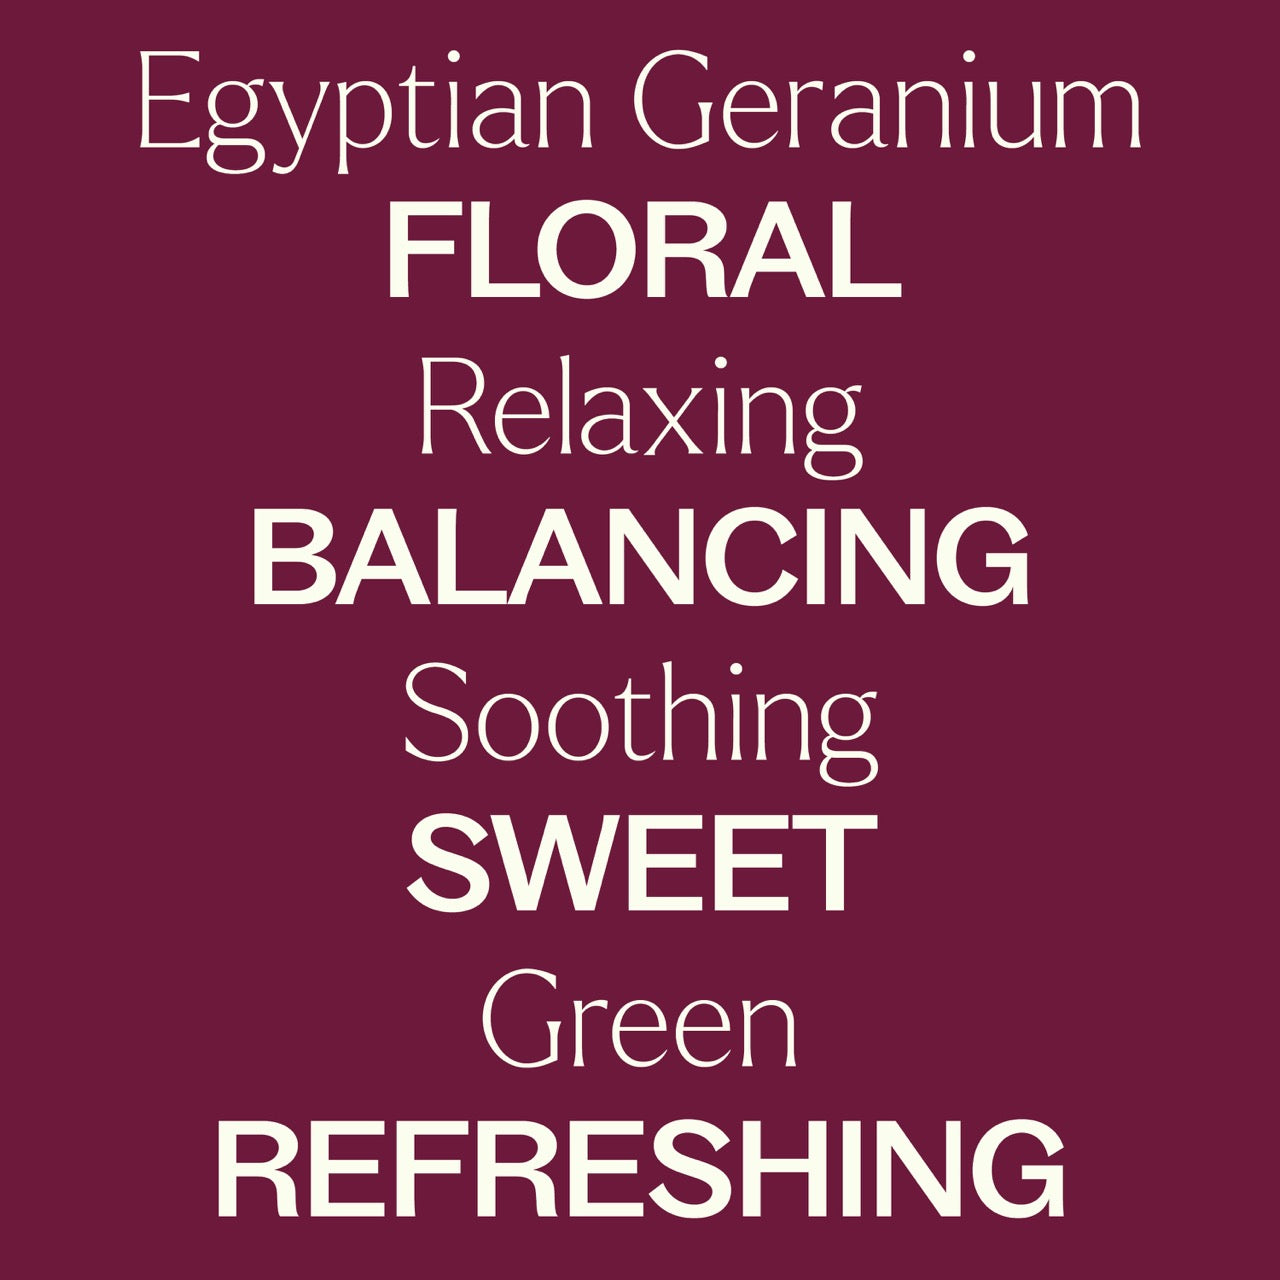 Key features Egyptian Geranium Essential Oil: floral, relaxing, balancing, soothing, sweet, green, refreshing